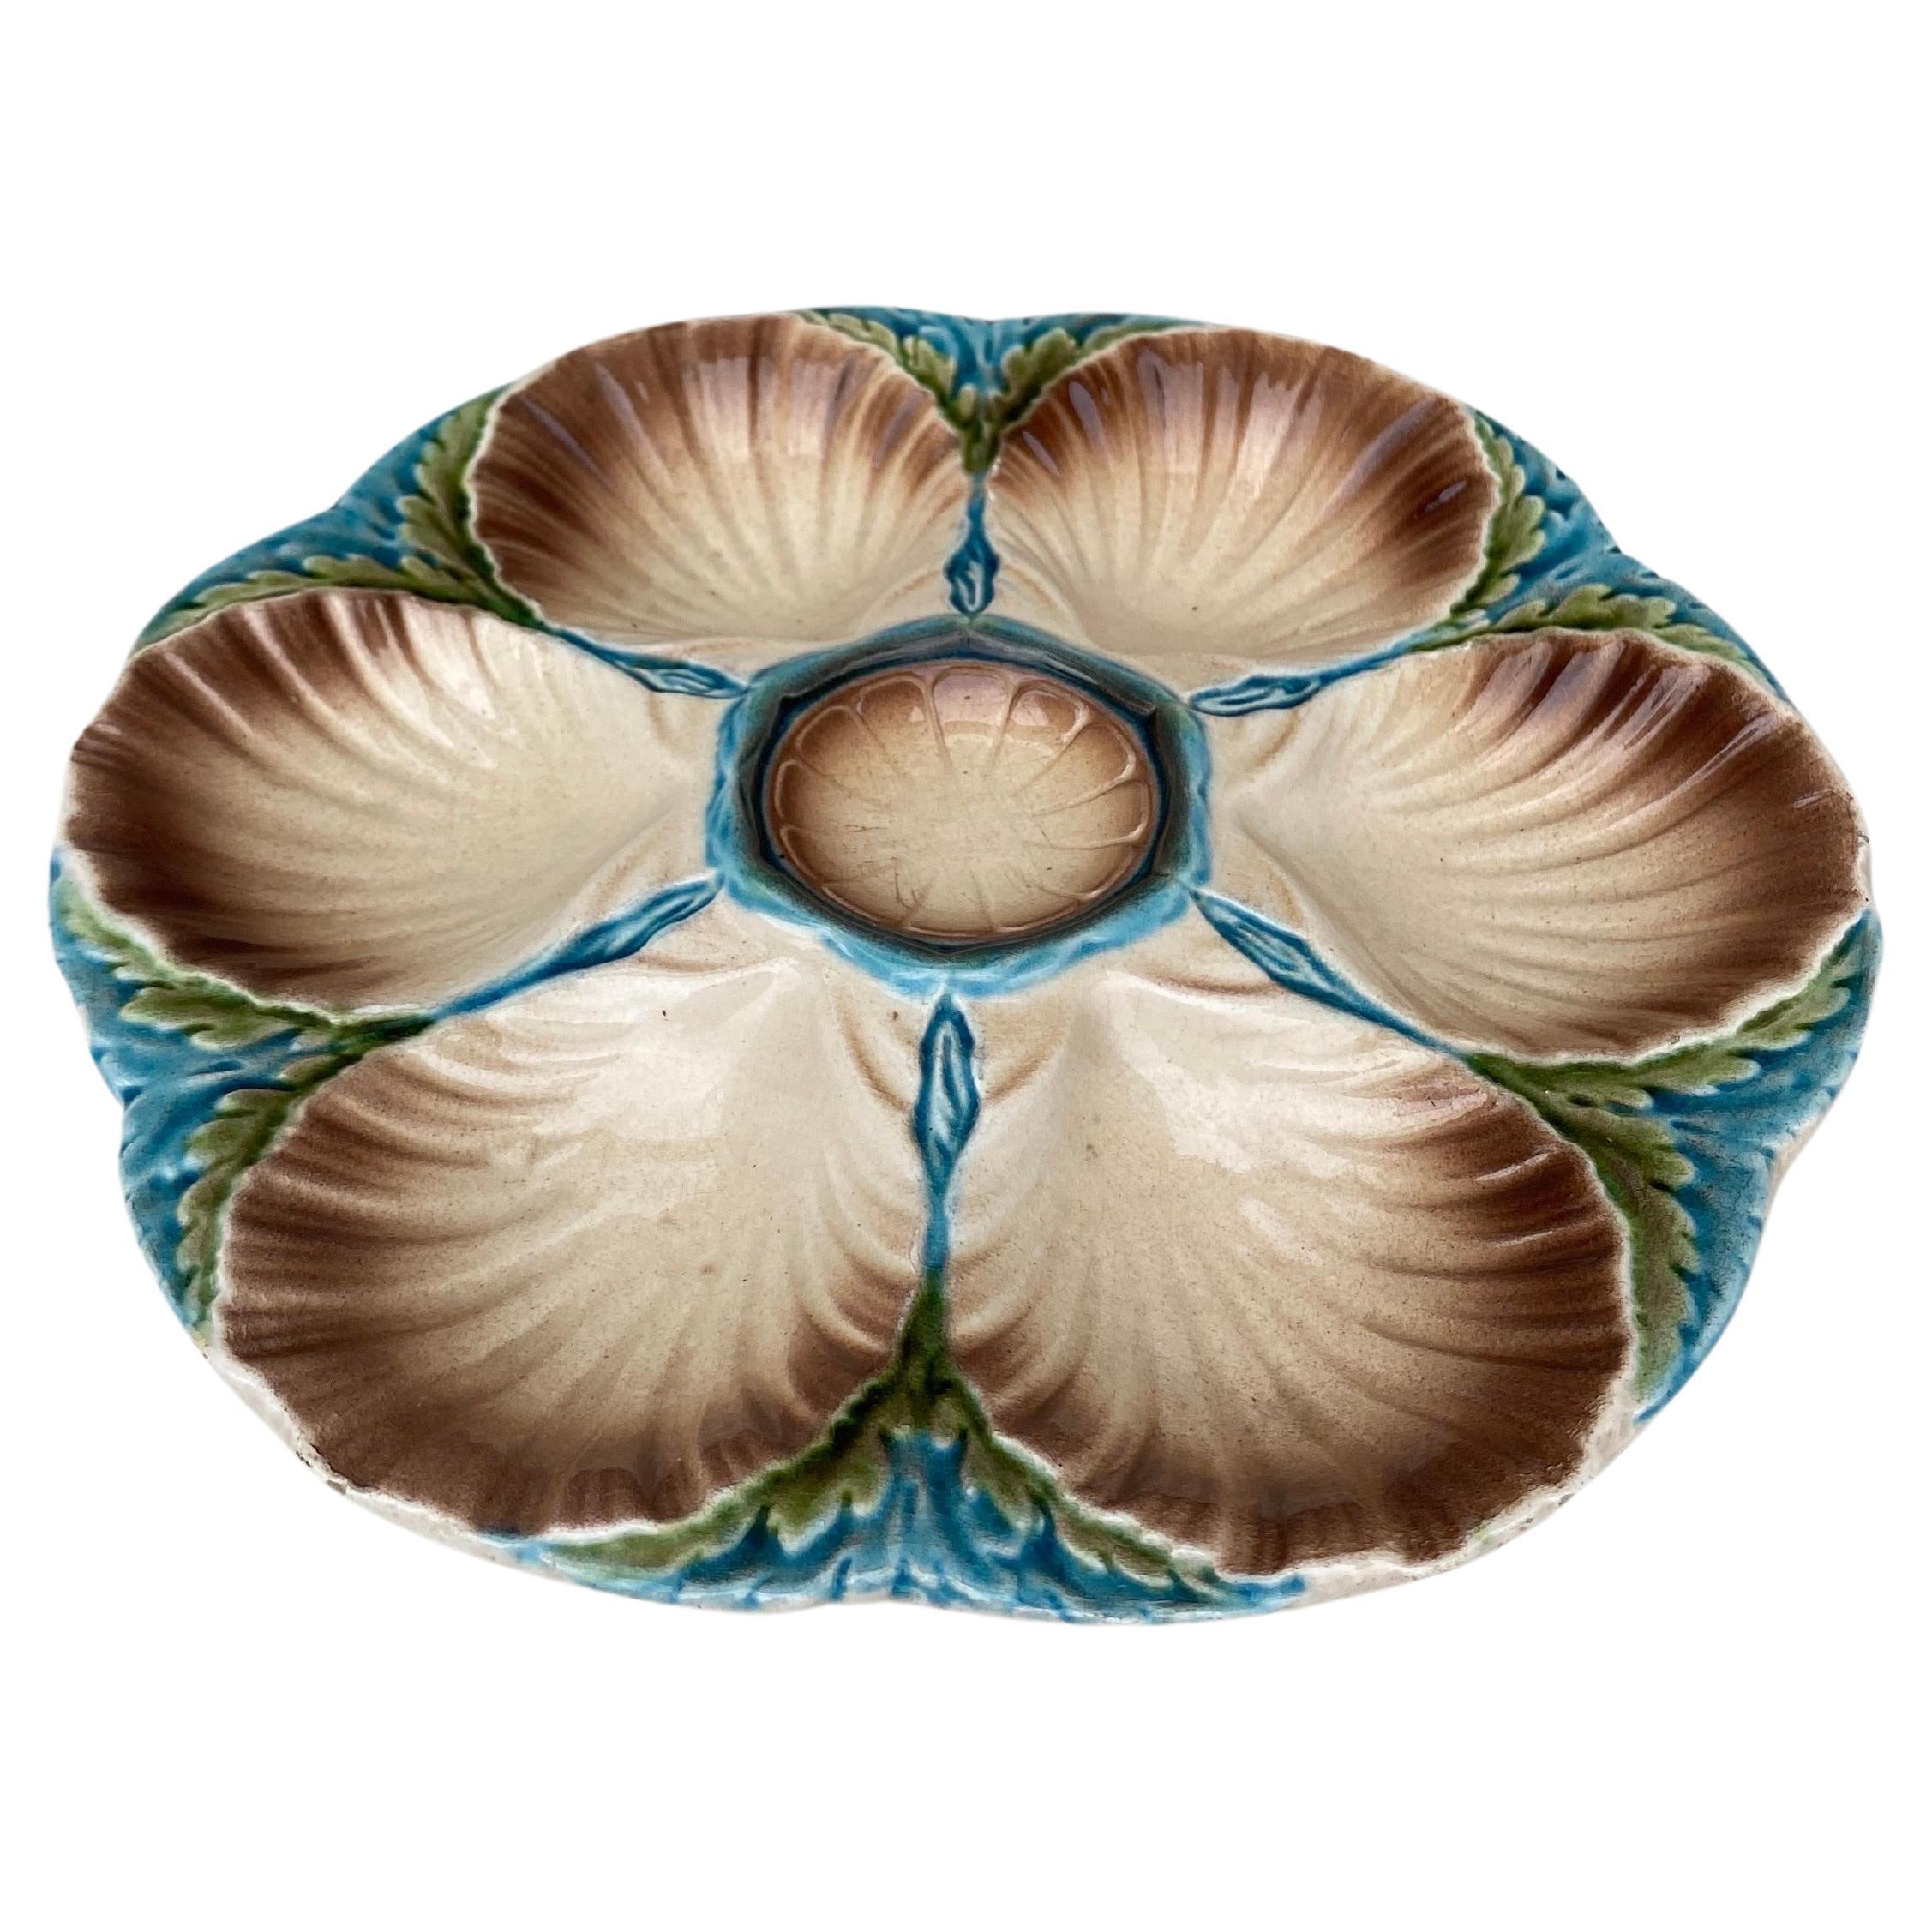 Majolica oyster plate Sarreguemines, circa 1890.
6 Shells and space for the lemon on the center.